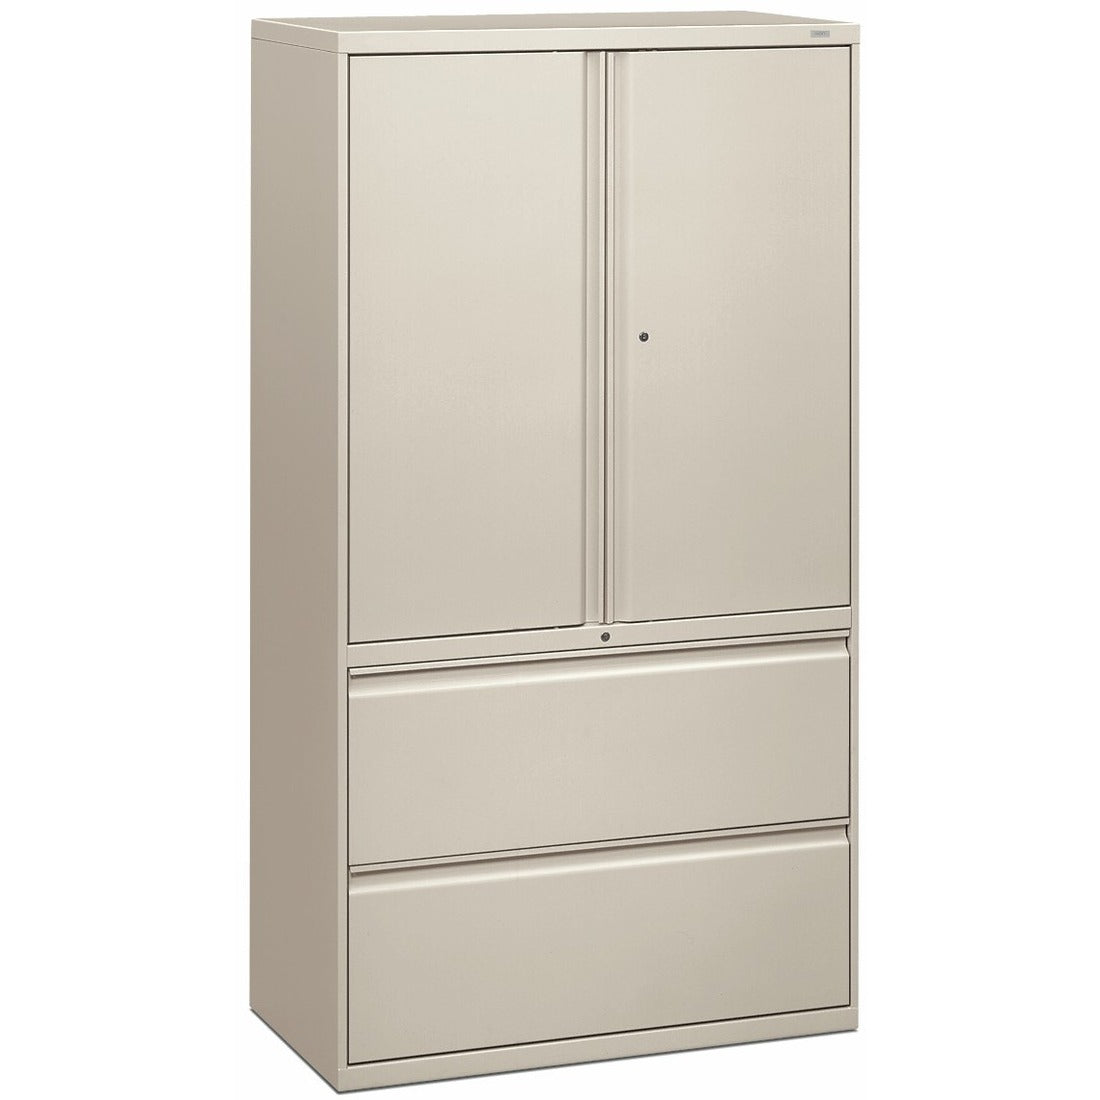 HON Brigade 800 H885LS Lateral File - 36" x 18"67" - 2 Drawer(s) - 3 Shelve(s) - Finish: Light Gray - 